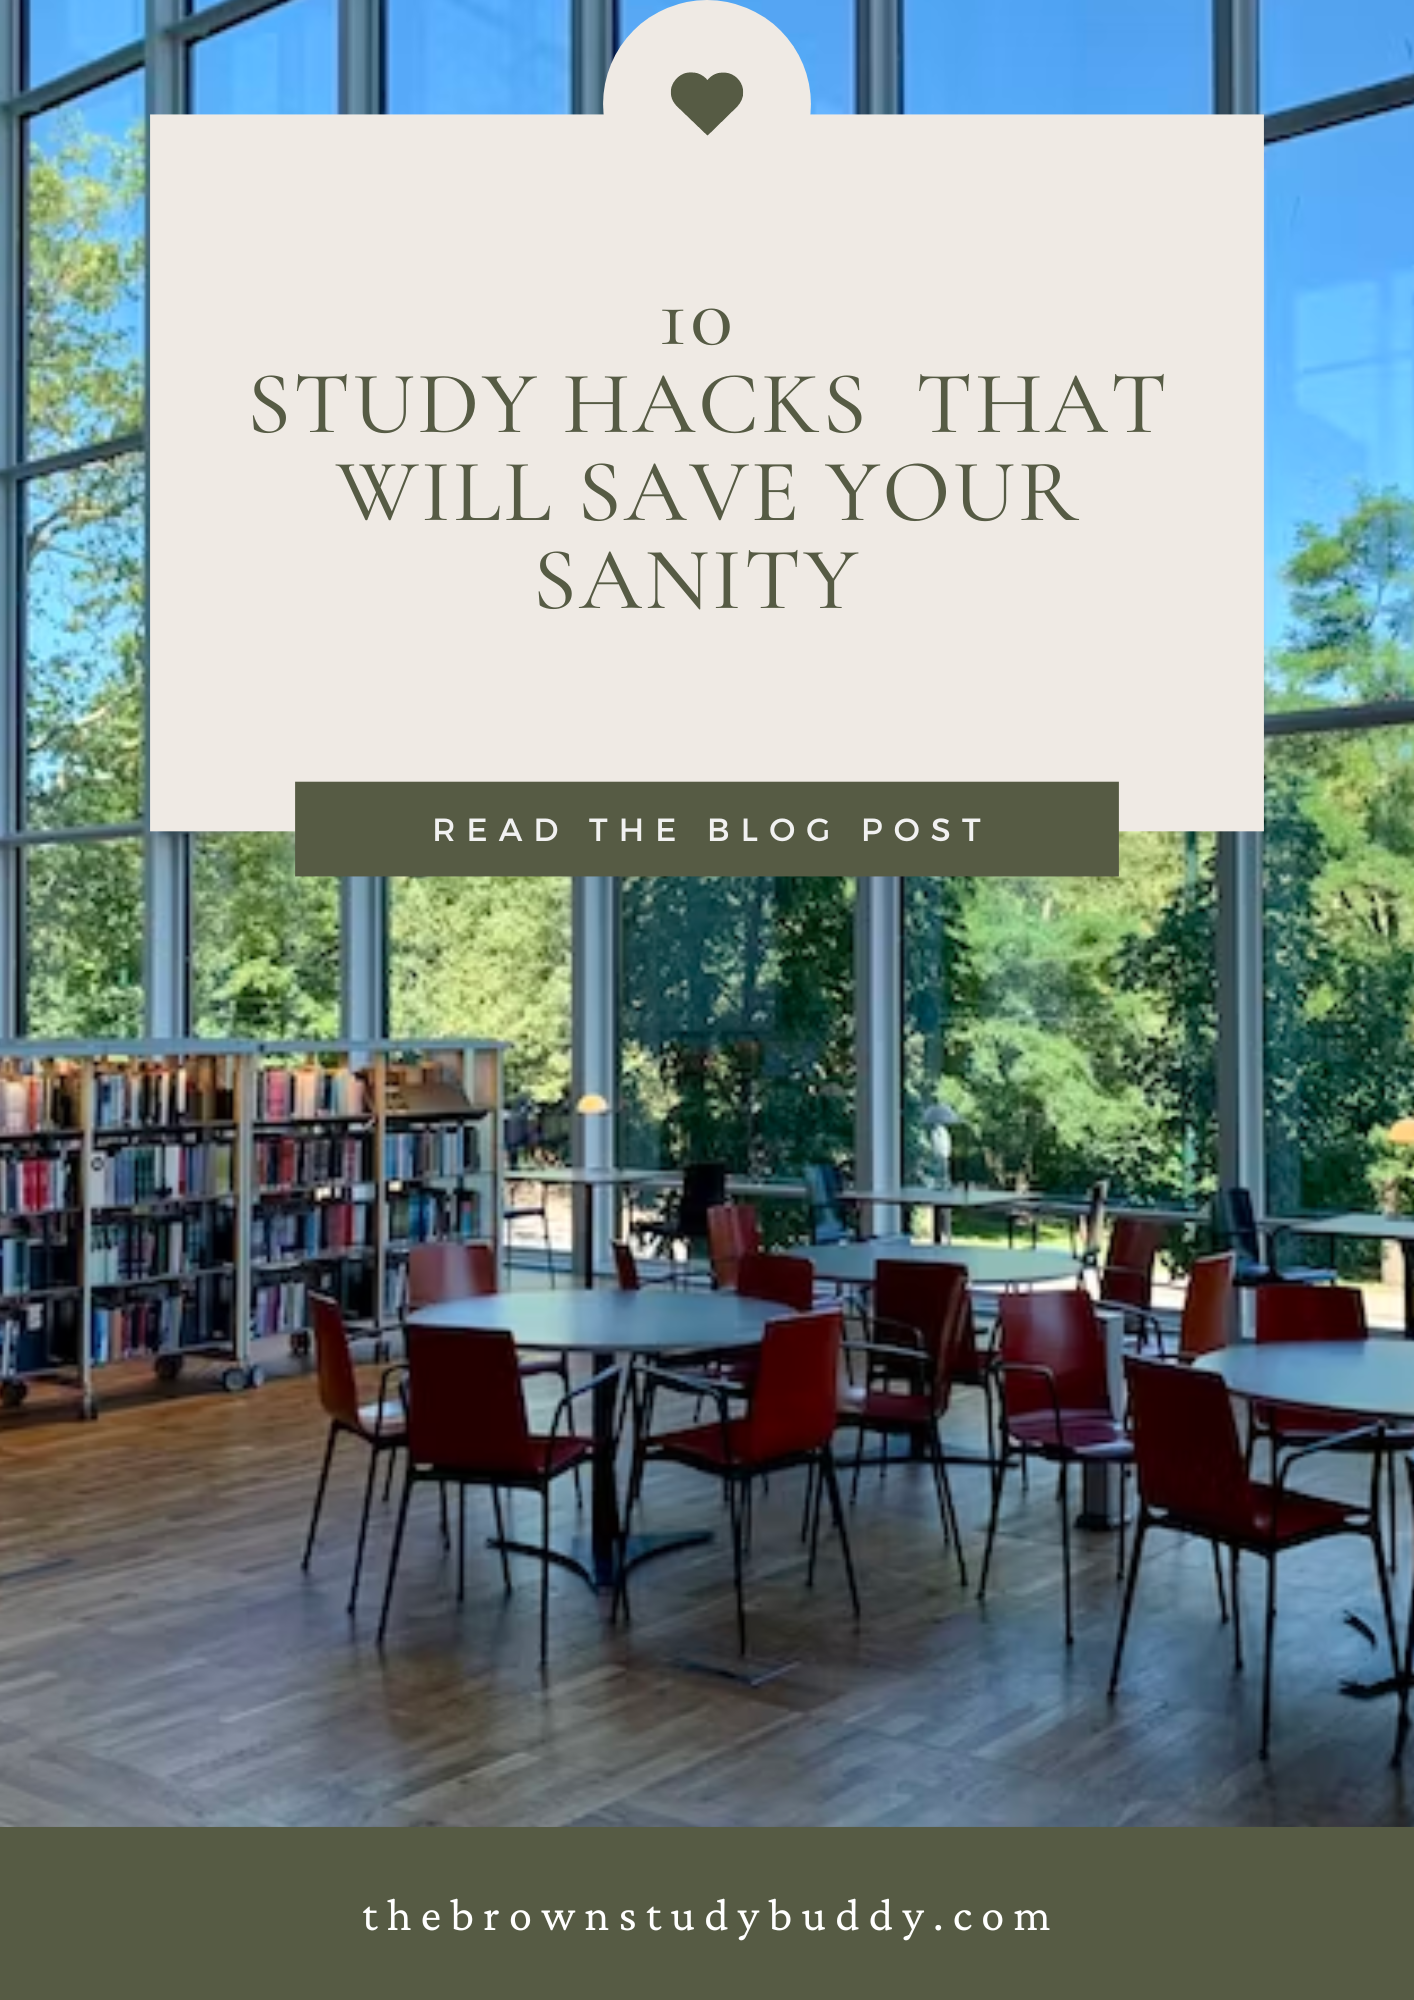 10 Study Hacks That Will Save Your Sanity